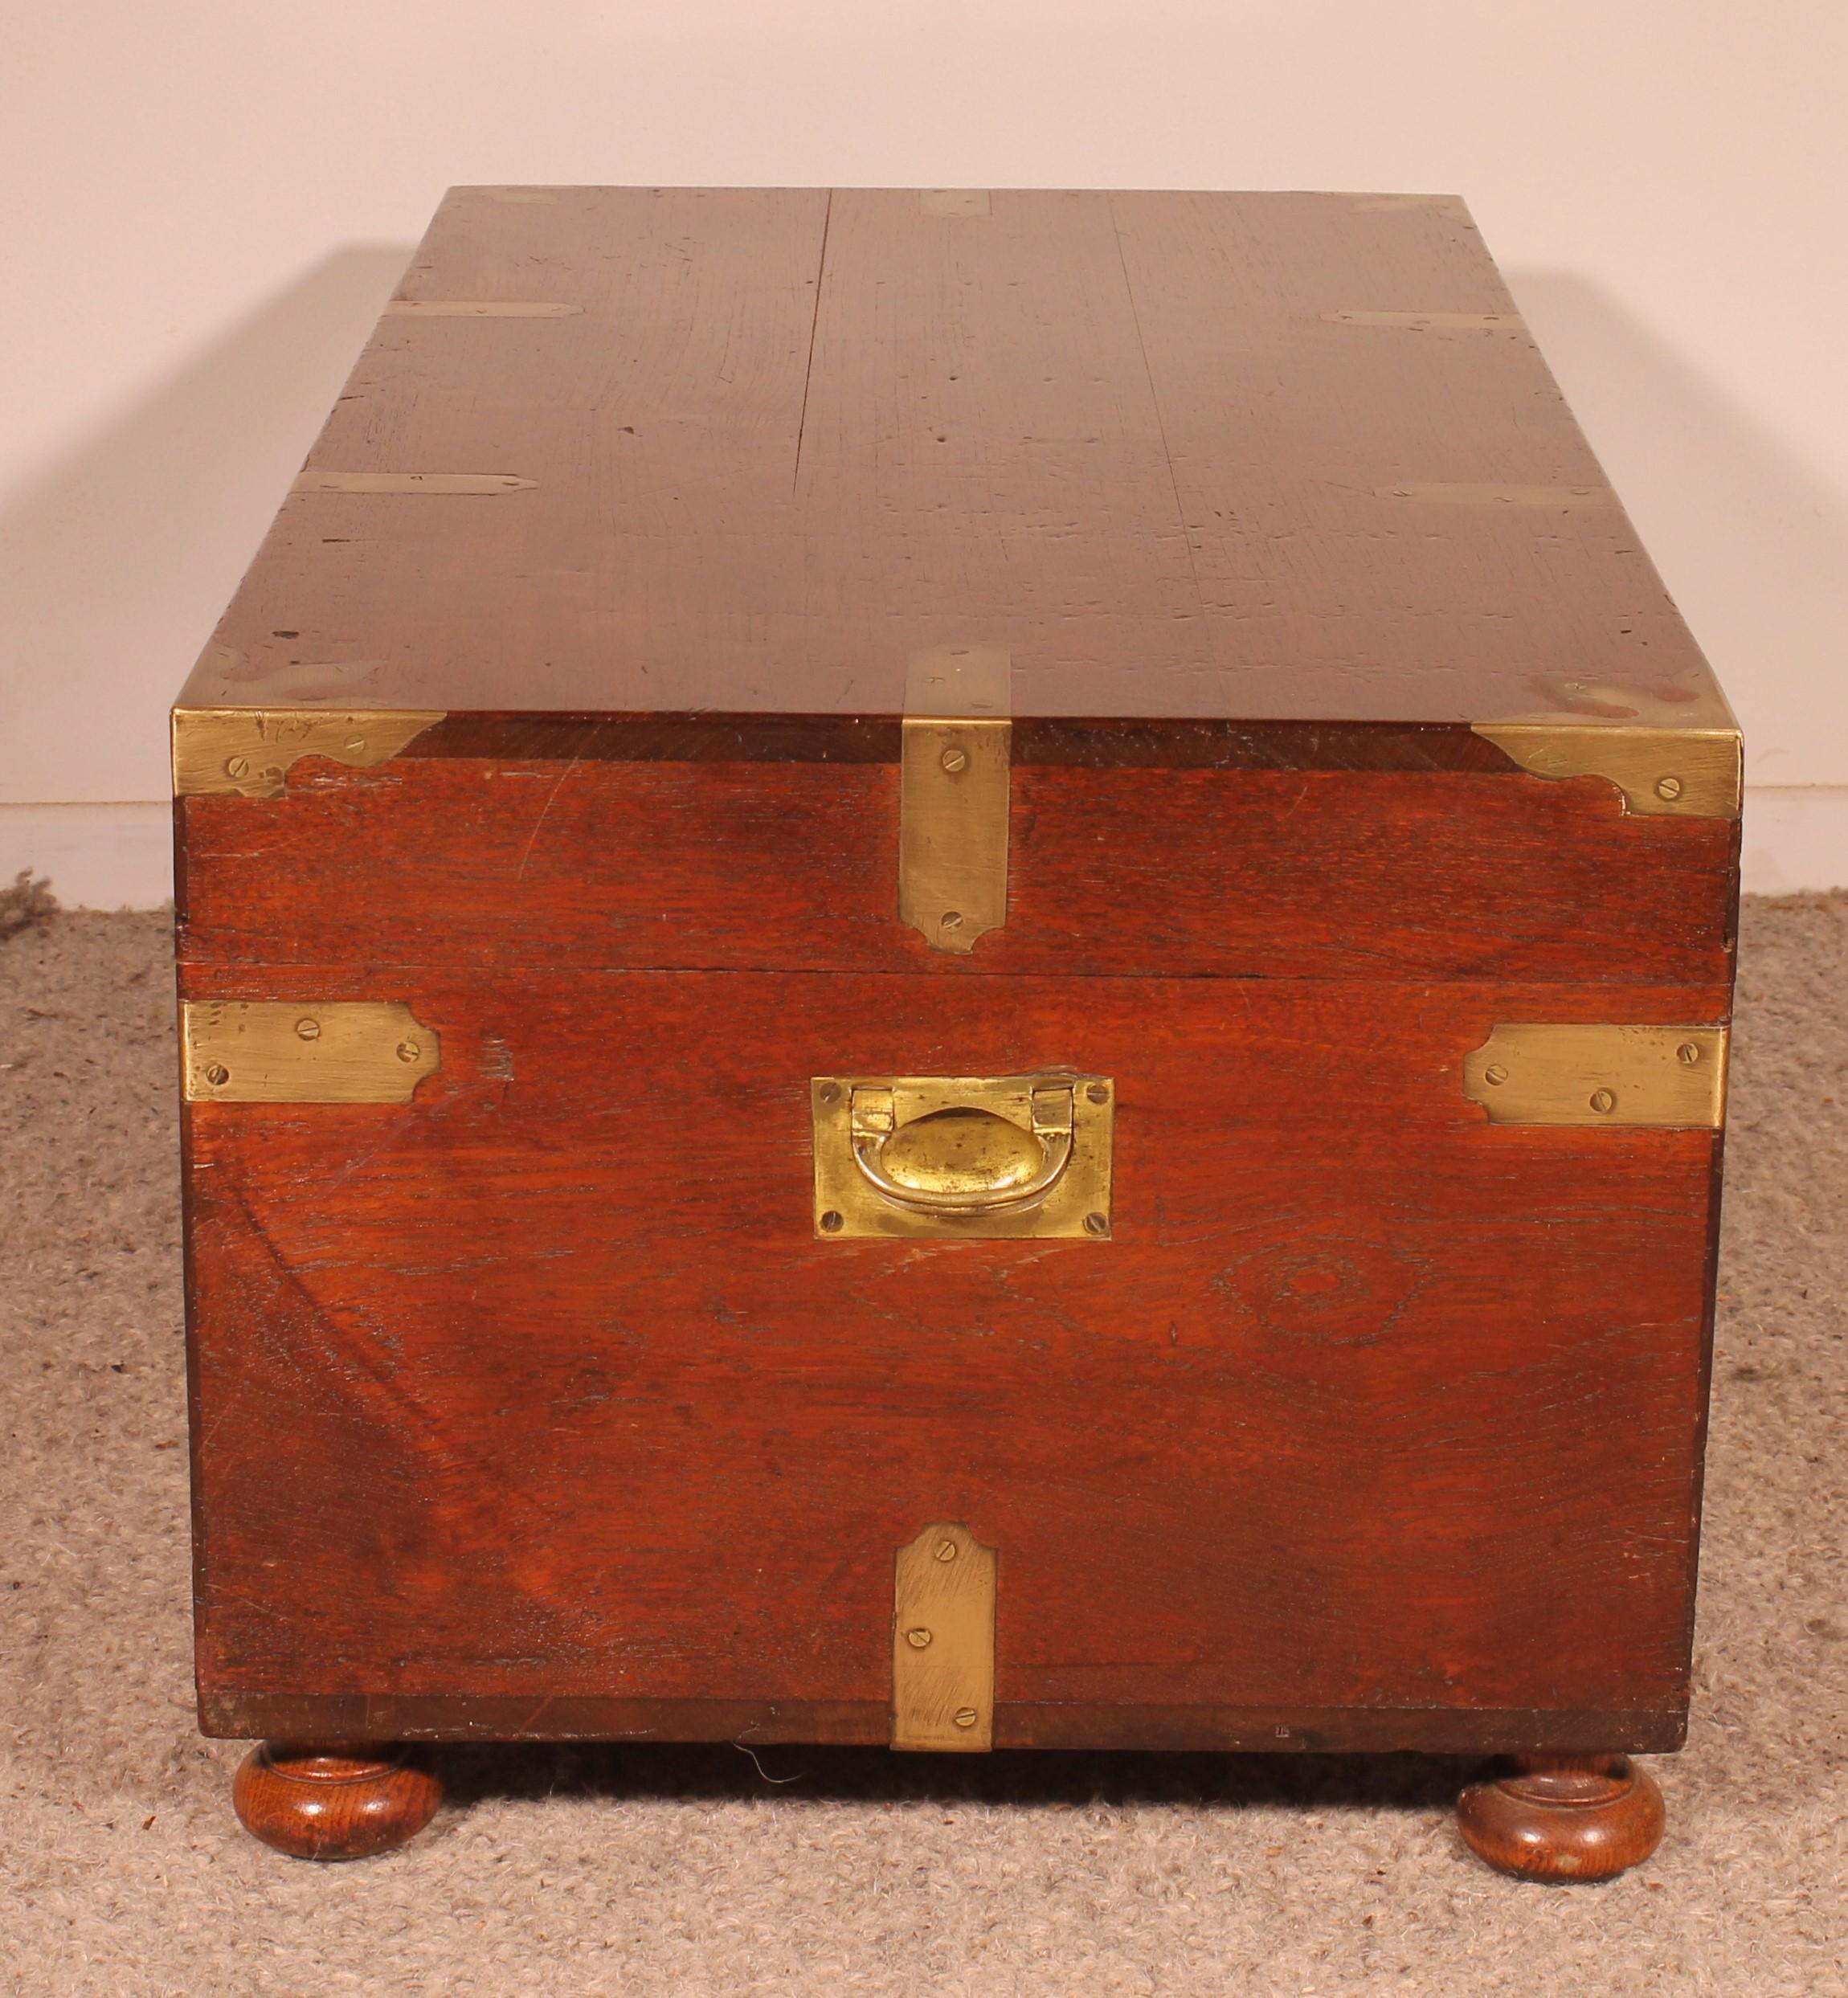 Teak Campaign Or Marine Chest From The 19th Century 8